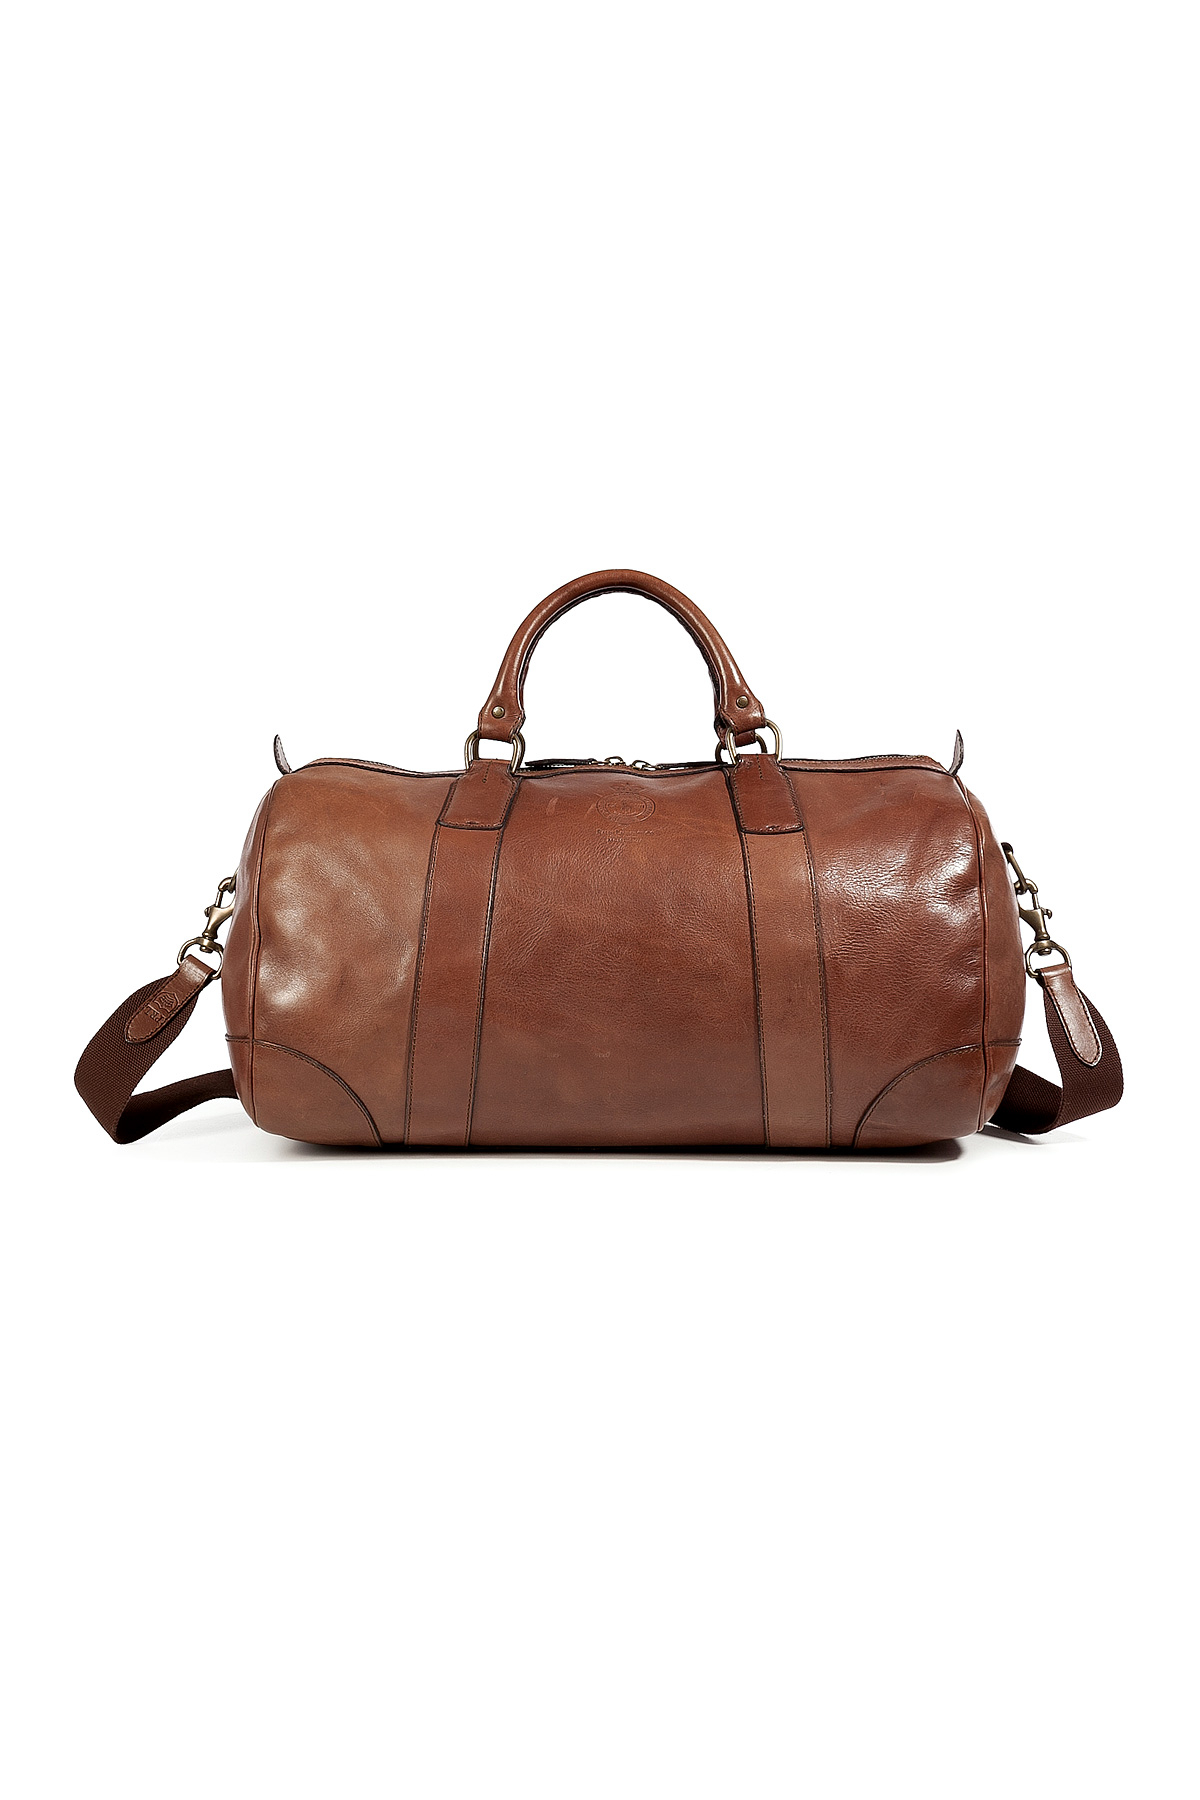 Lyst - Polo Ralph Lauren Leather Overnight Duffle Bag in Brown for Men